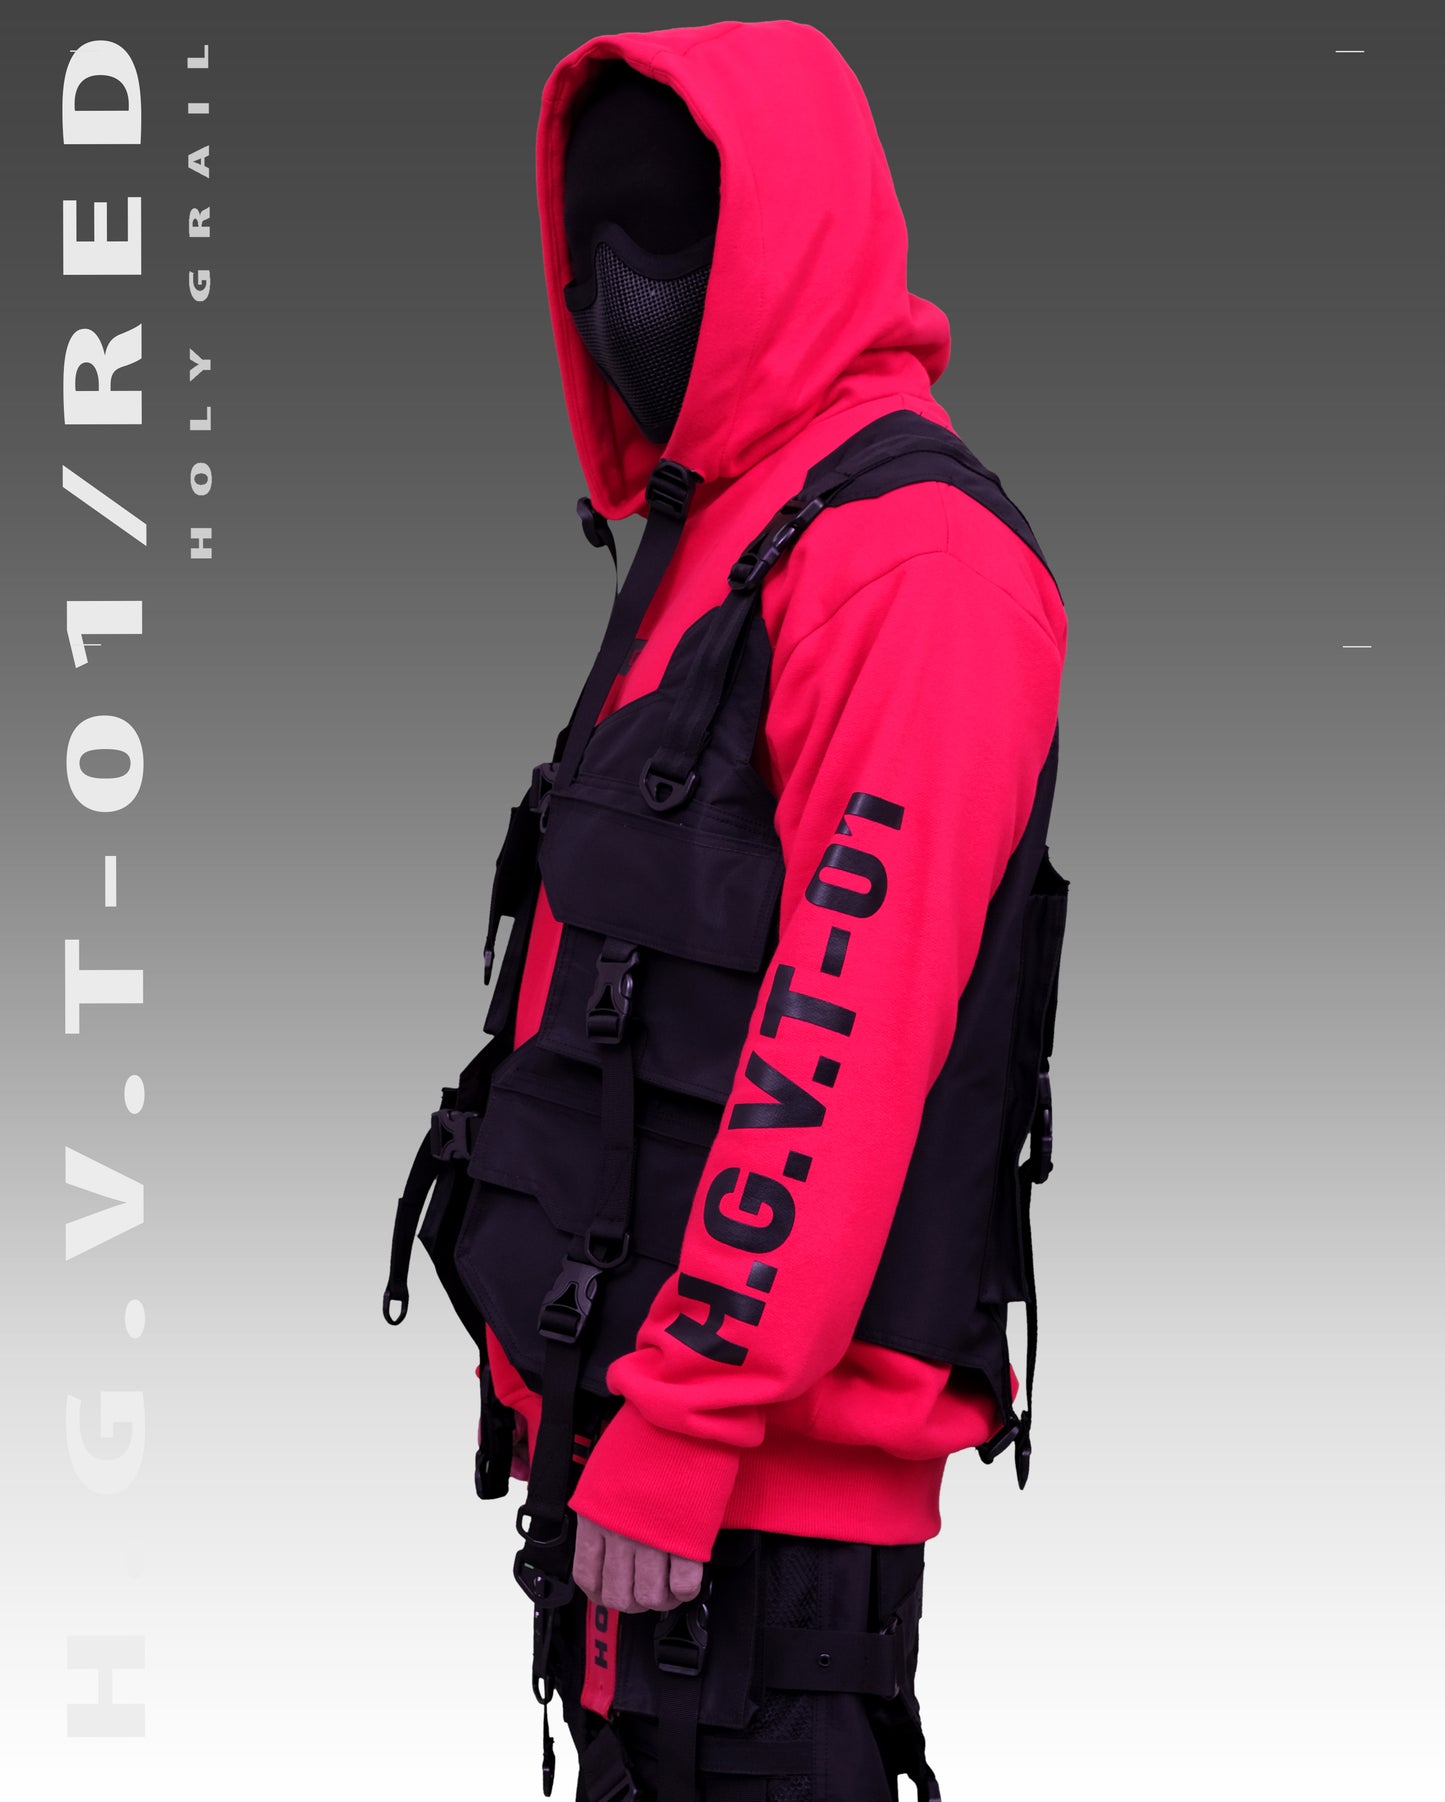 H.G.V.T-01/RED ( SOLD OUT! )